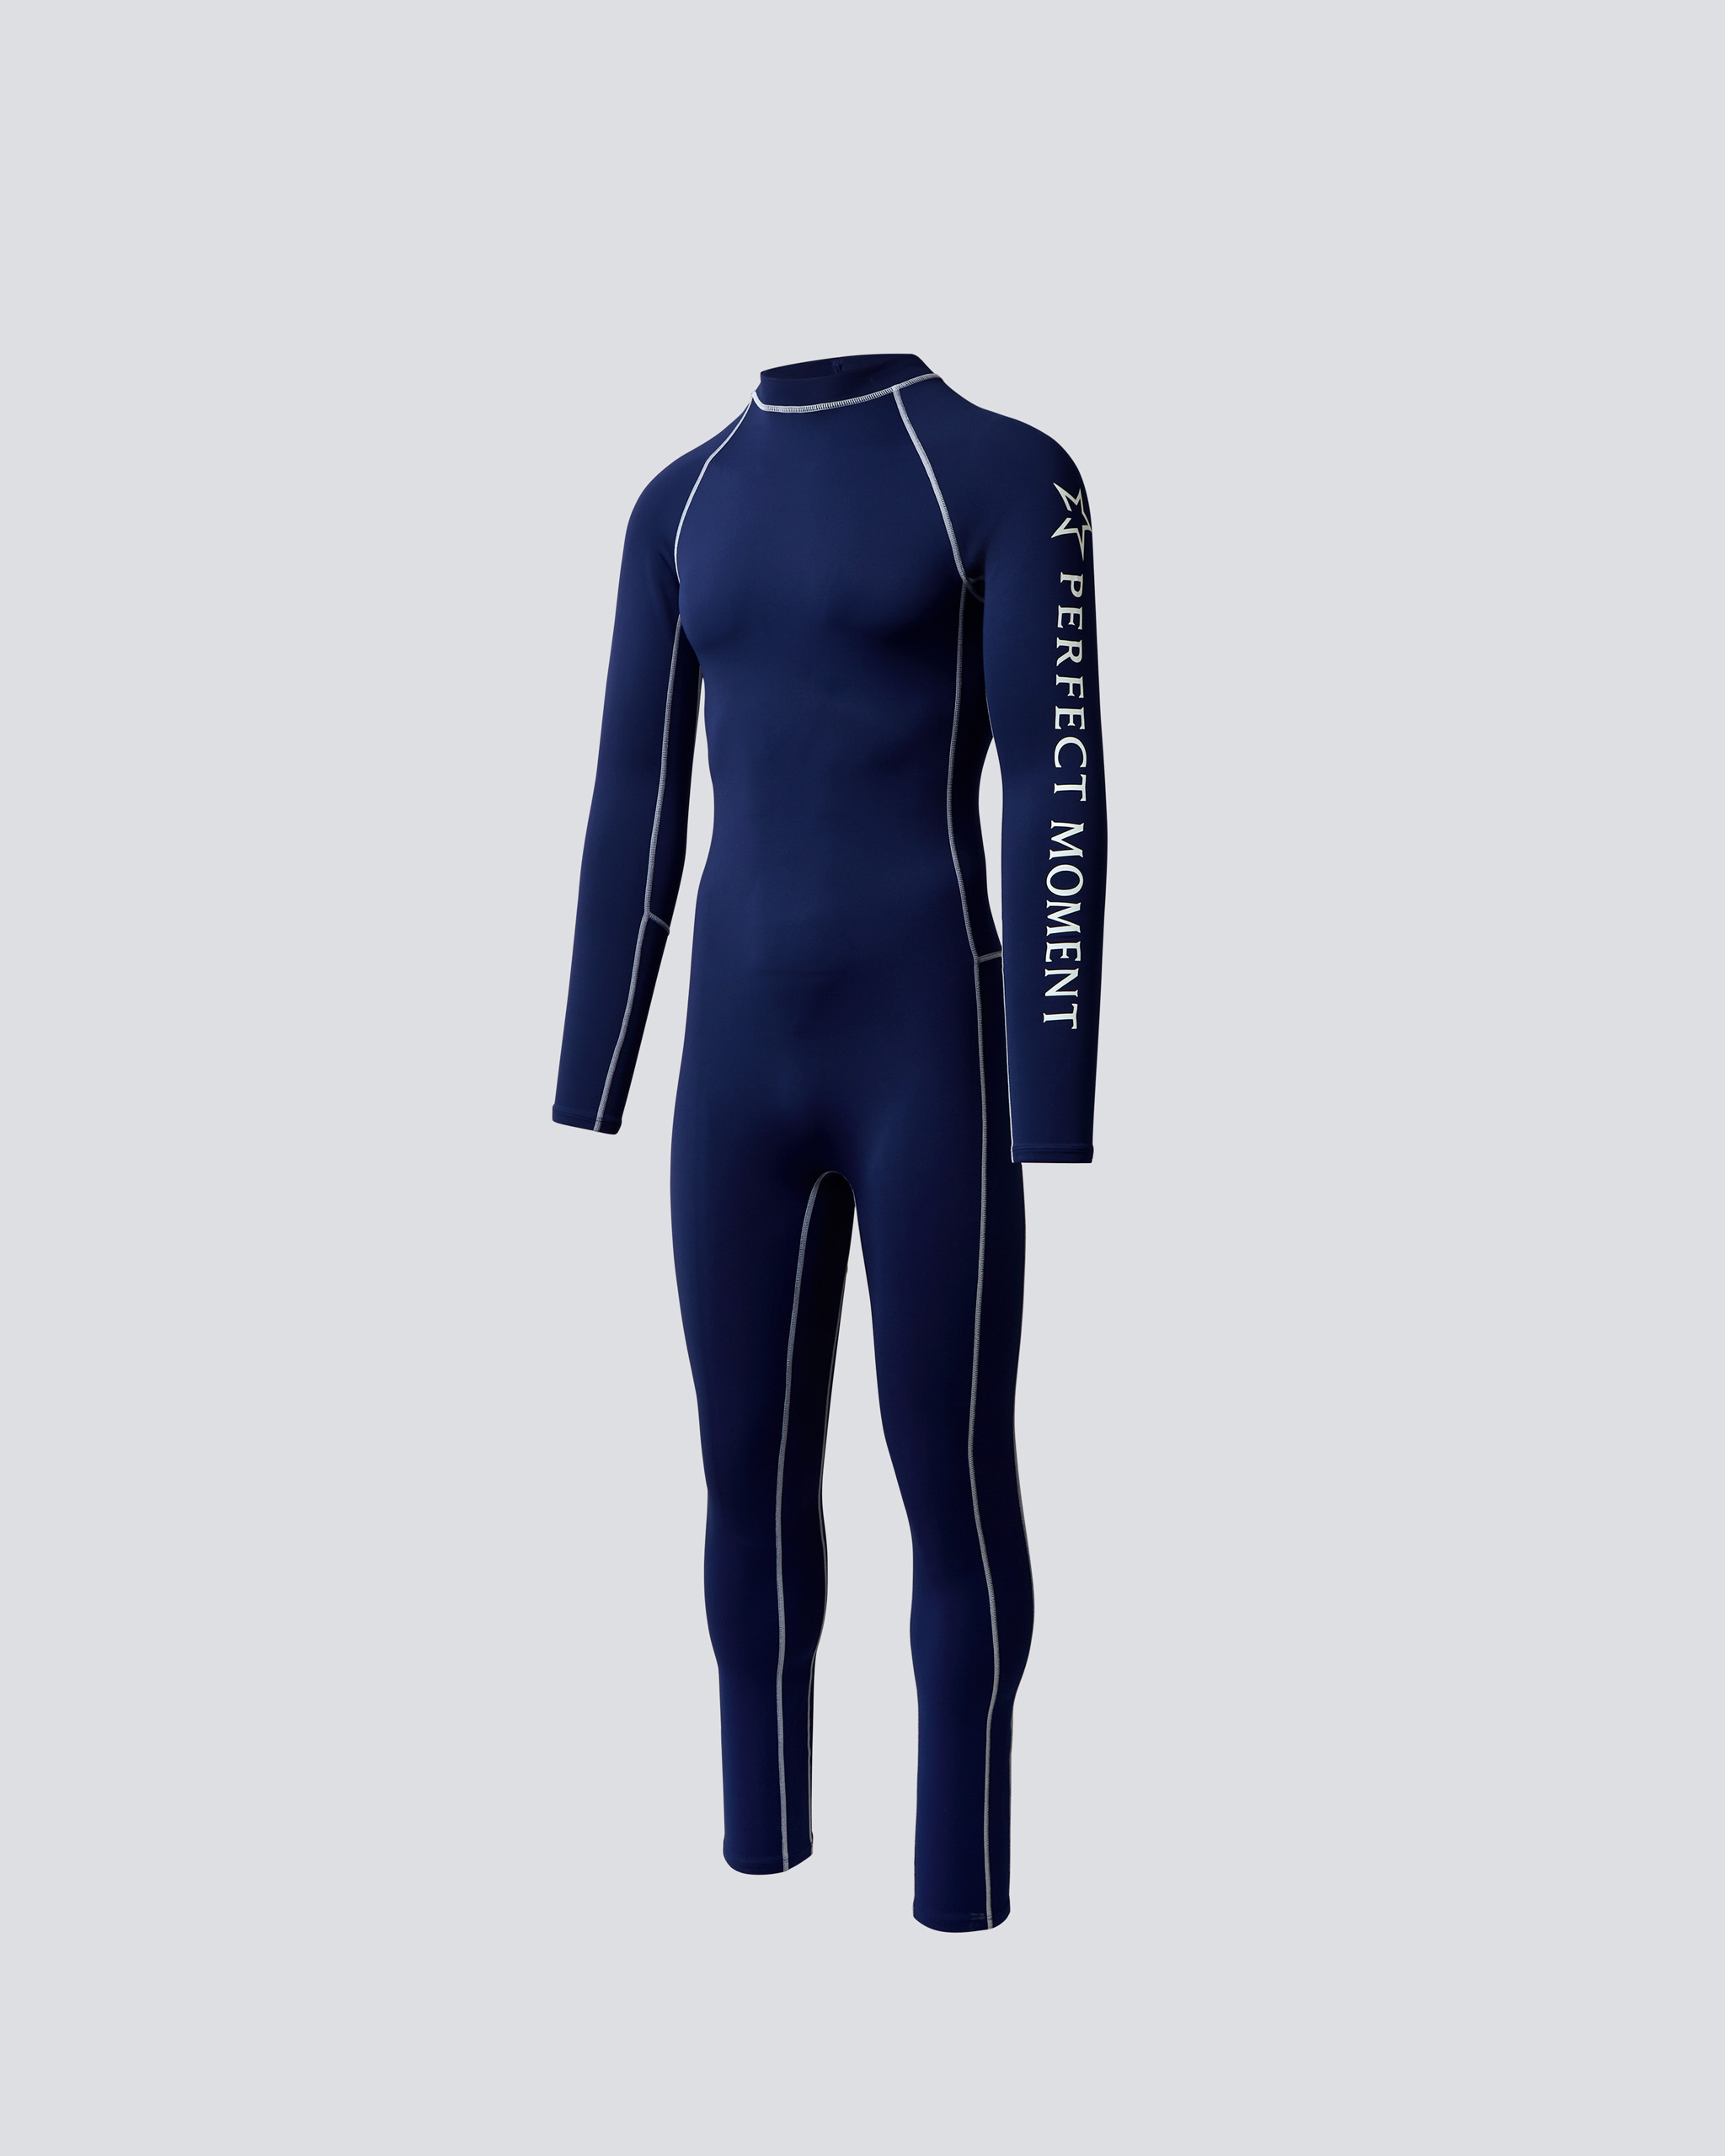 Perfect Moment Neptune West Suit In Navy